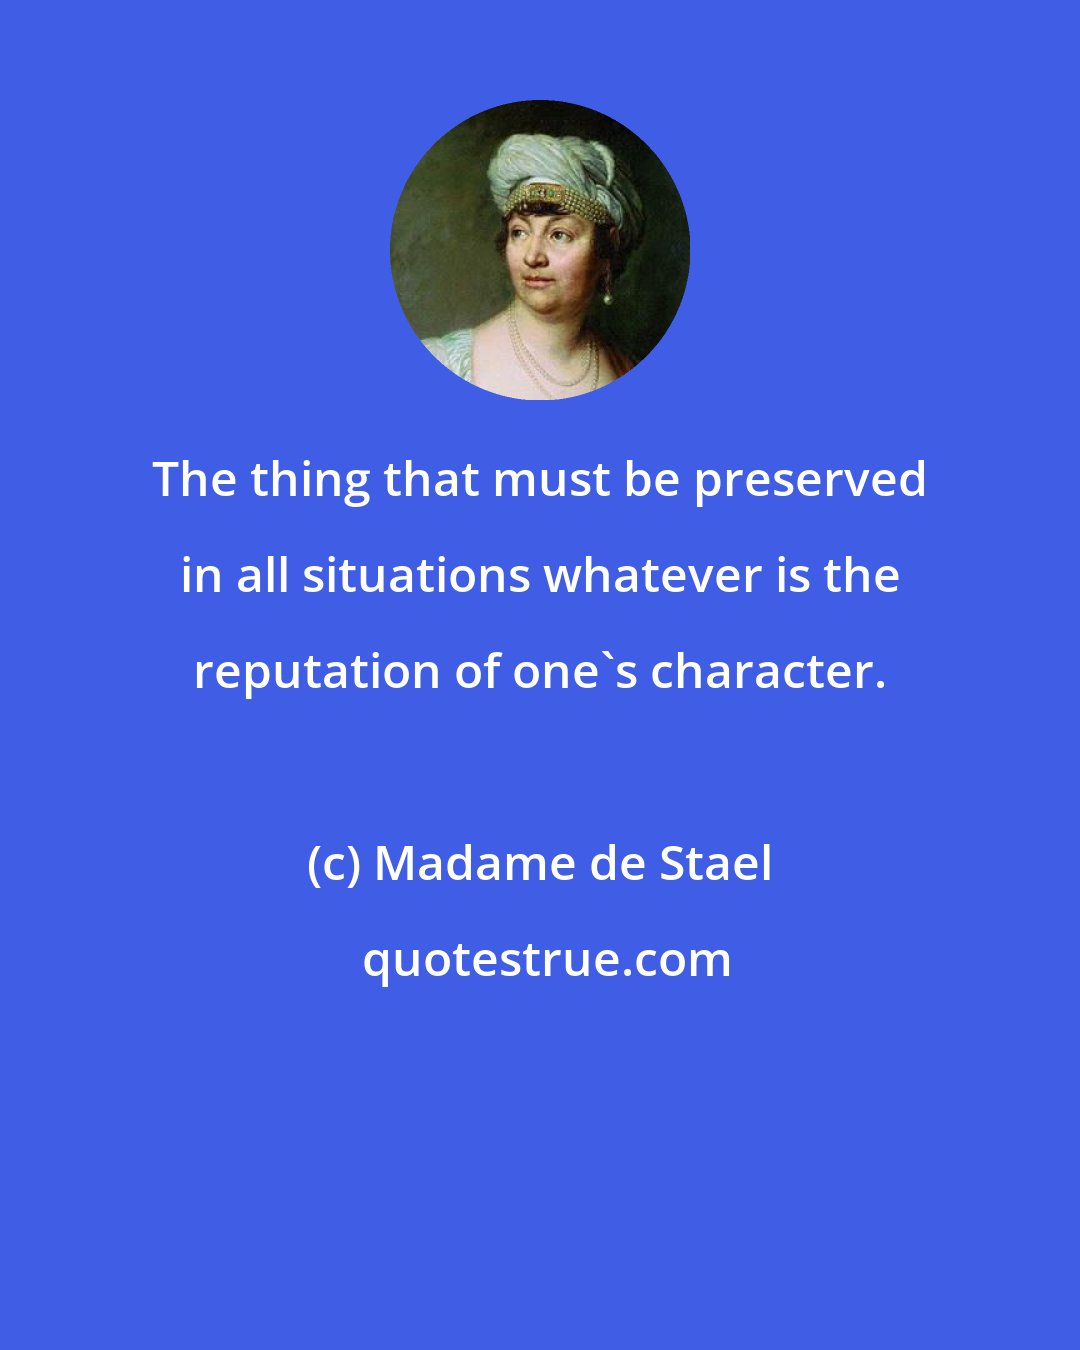 Madame de Stael: The thing that must be preserved in all situations whatever is the reputation of one's character.